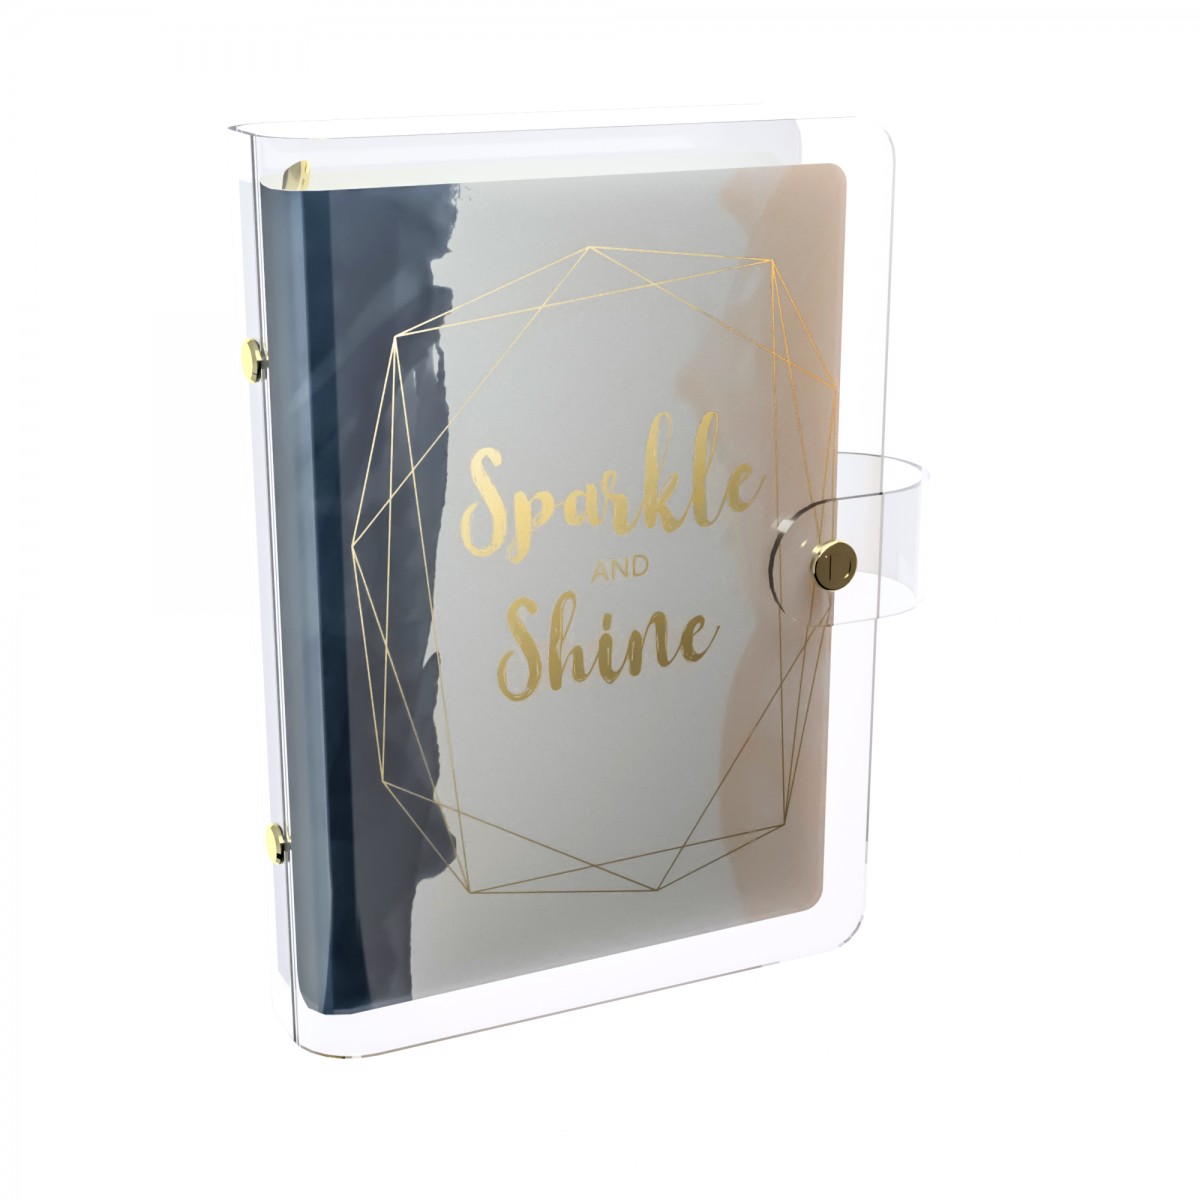 DISCAGENDA CLARITY CLEAR PVC PLANNER COVER - SPARKLE AND SHINE, RINGBOUND, PERSONAL SIZE